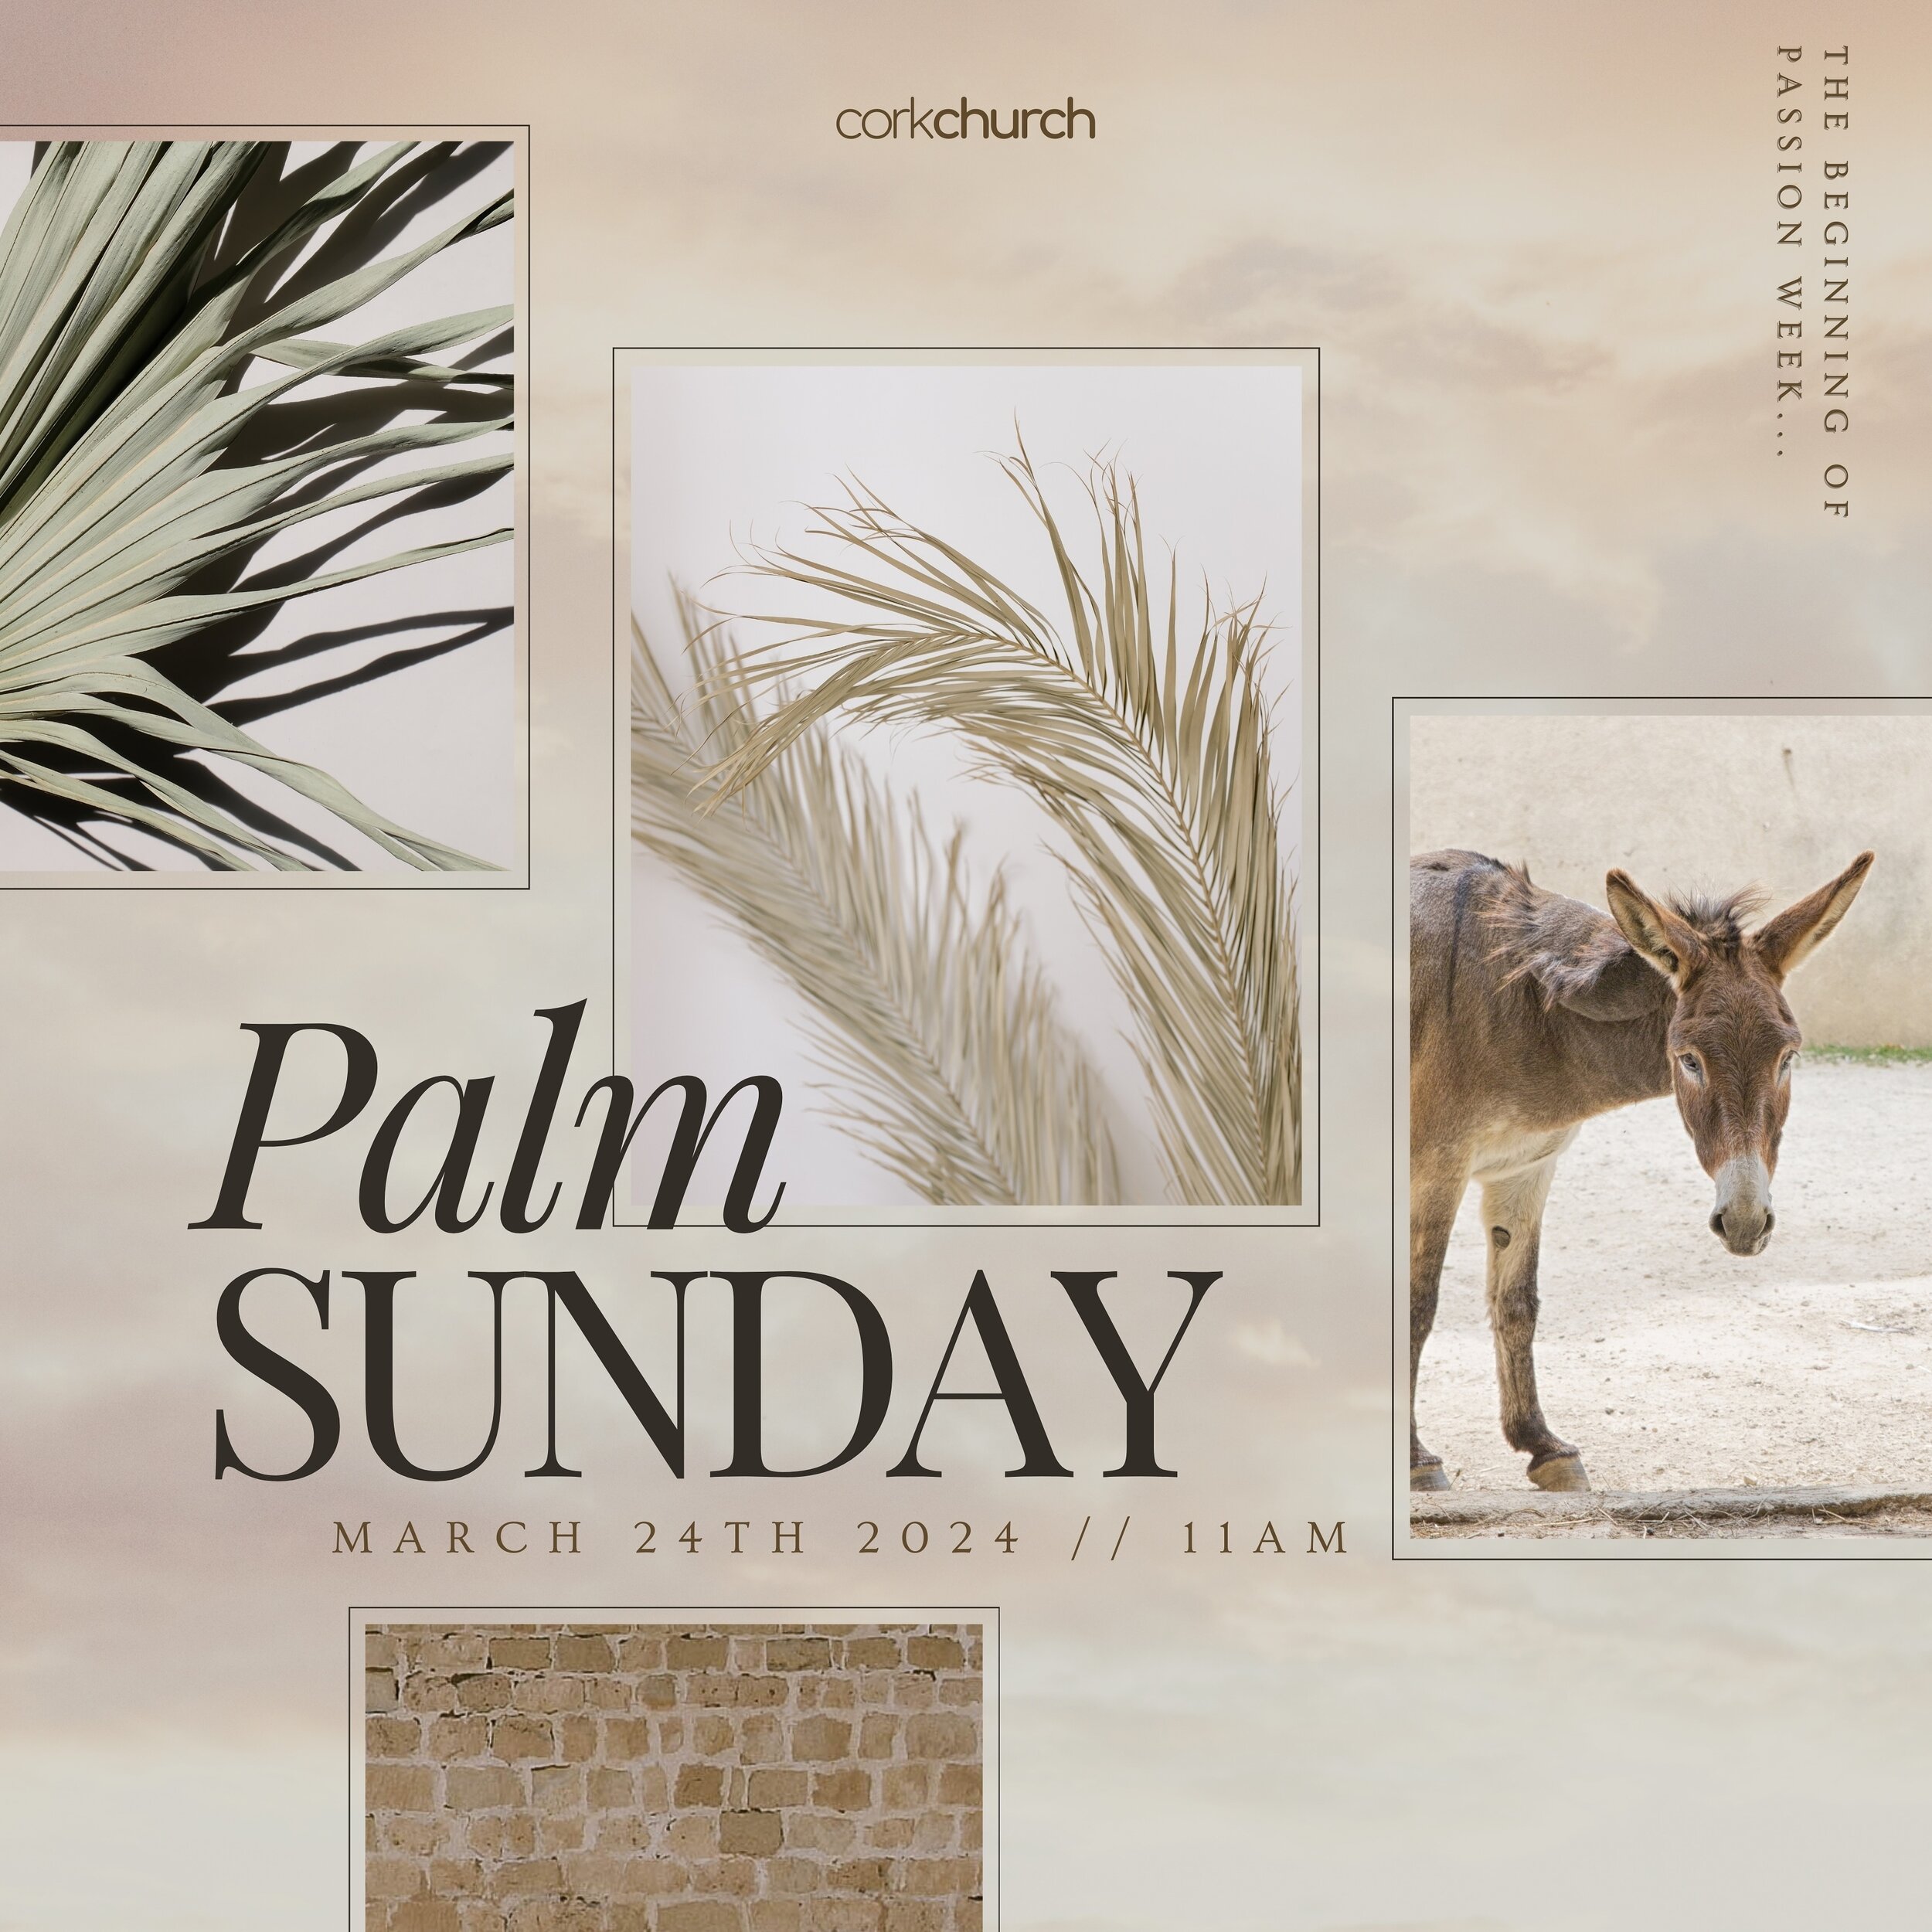 PALM SUNDAY 🌿

Tomorrow is Palm Sunday &amp; Day 1 of Passion Week! Join us as we journey through the last week of Jesus&rsquo; life starting tomorrow, March 24th, with Palm Sunday.

In His last week of life here on earth, Jesus did everything with 